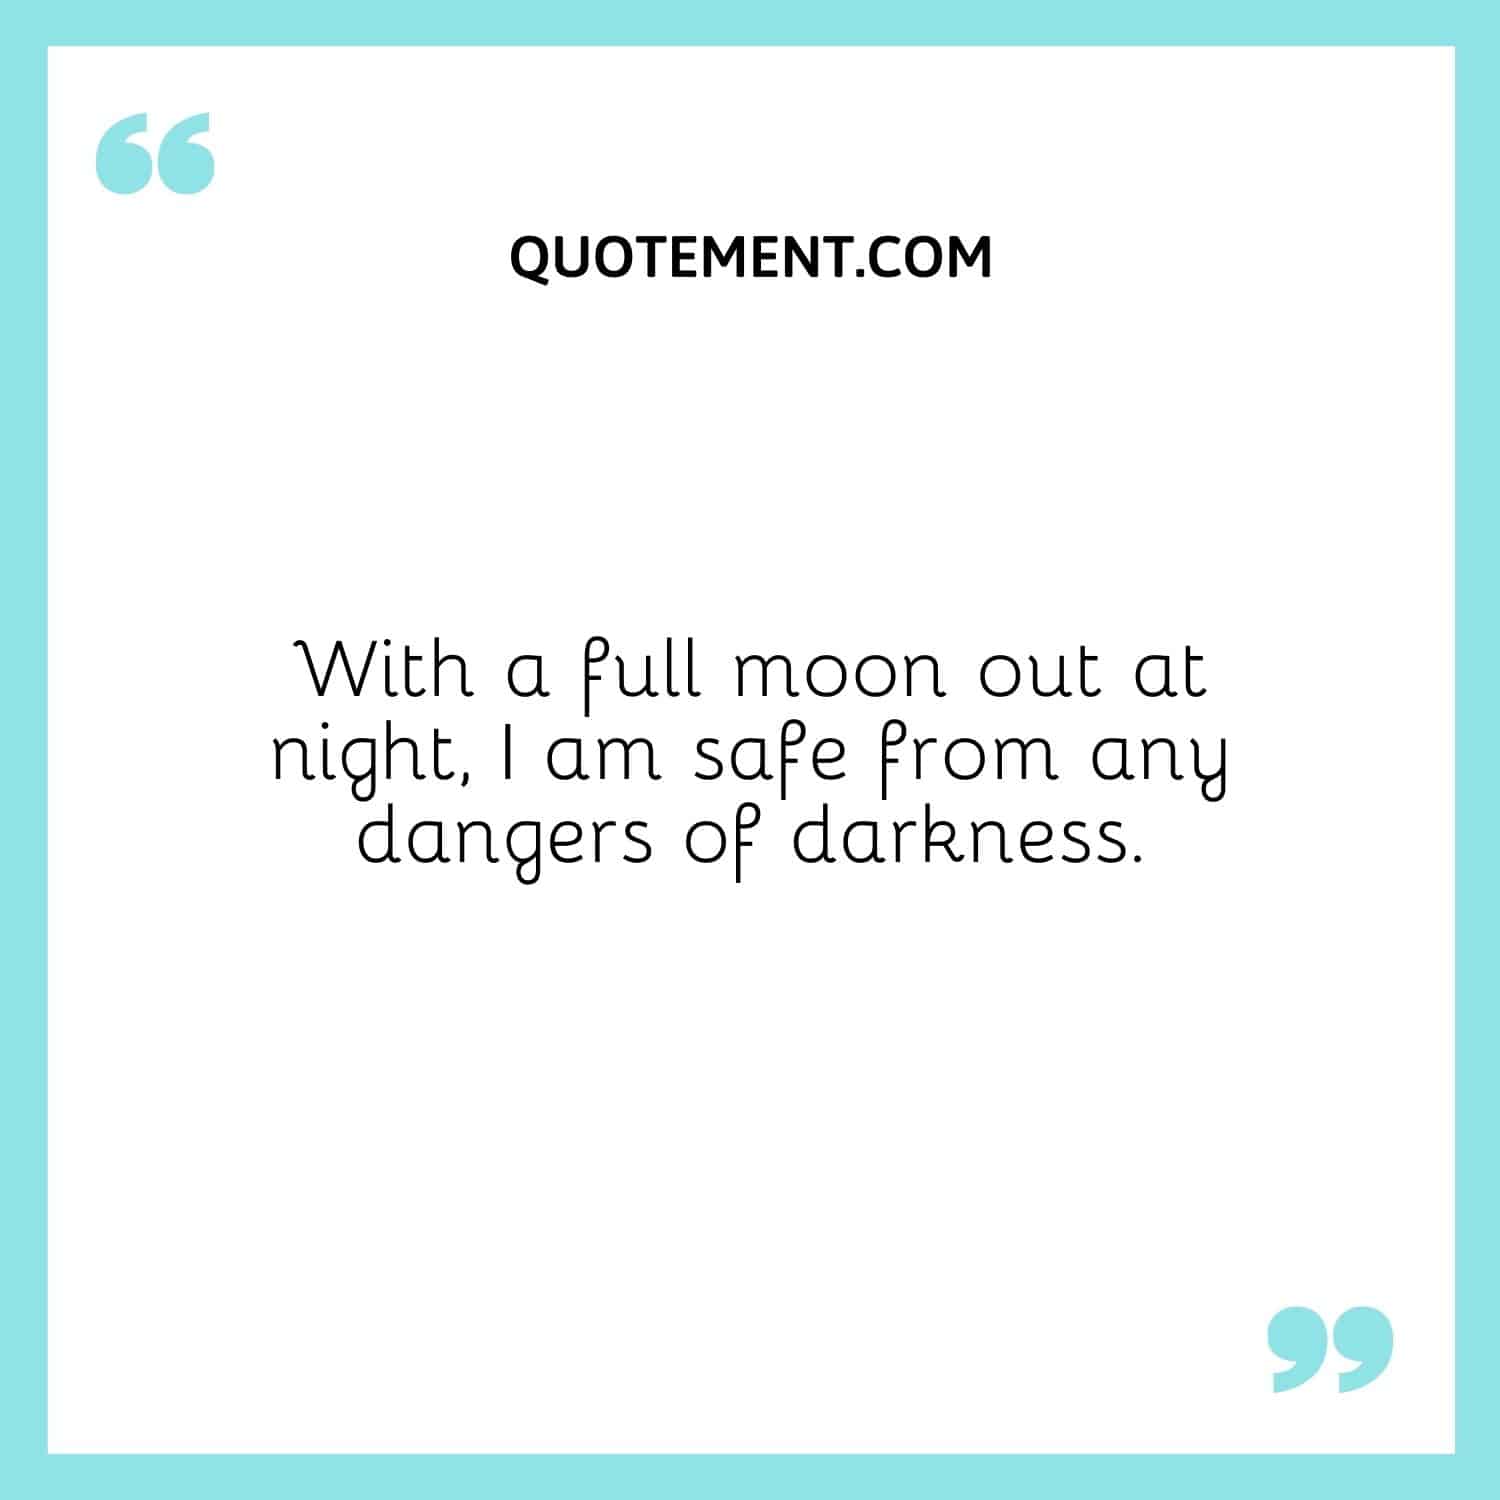 With a full moon out at night, I am safe from any dangers of darkness.